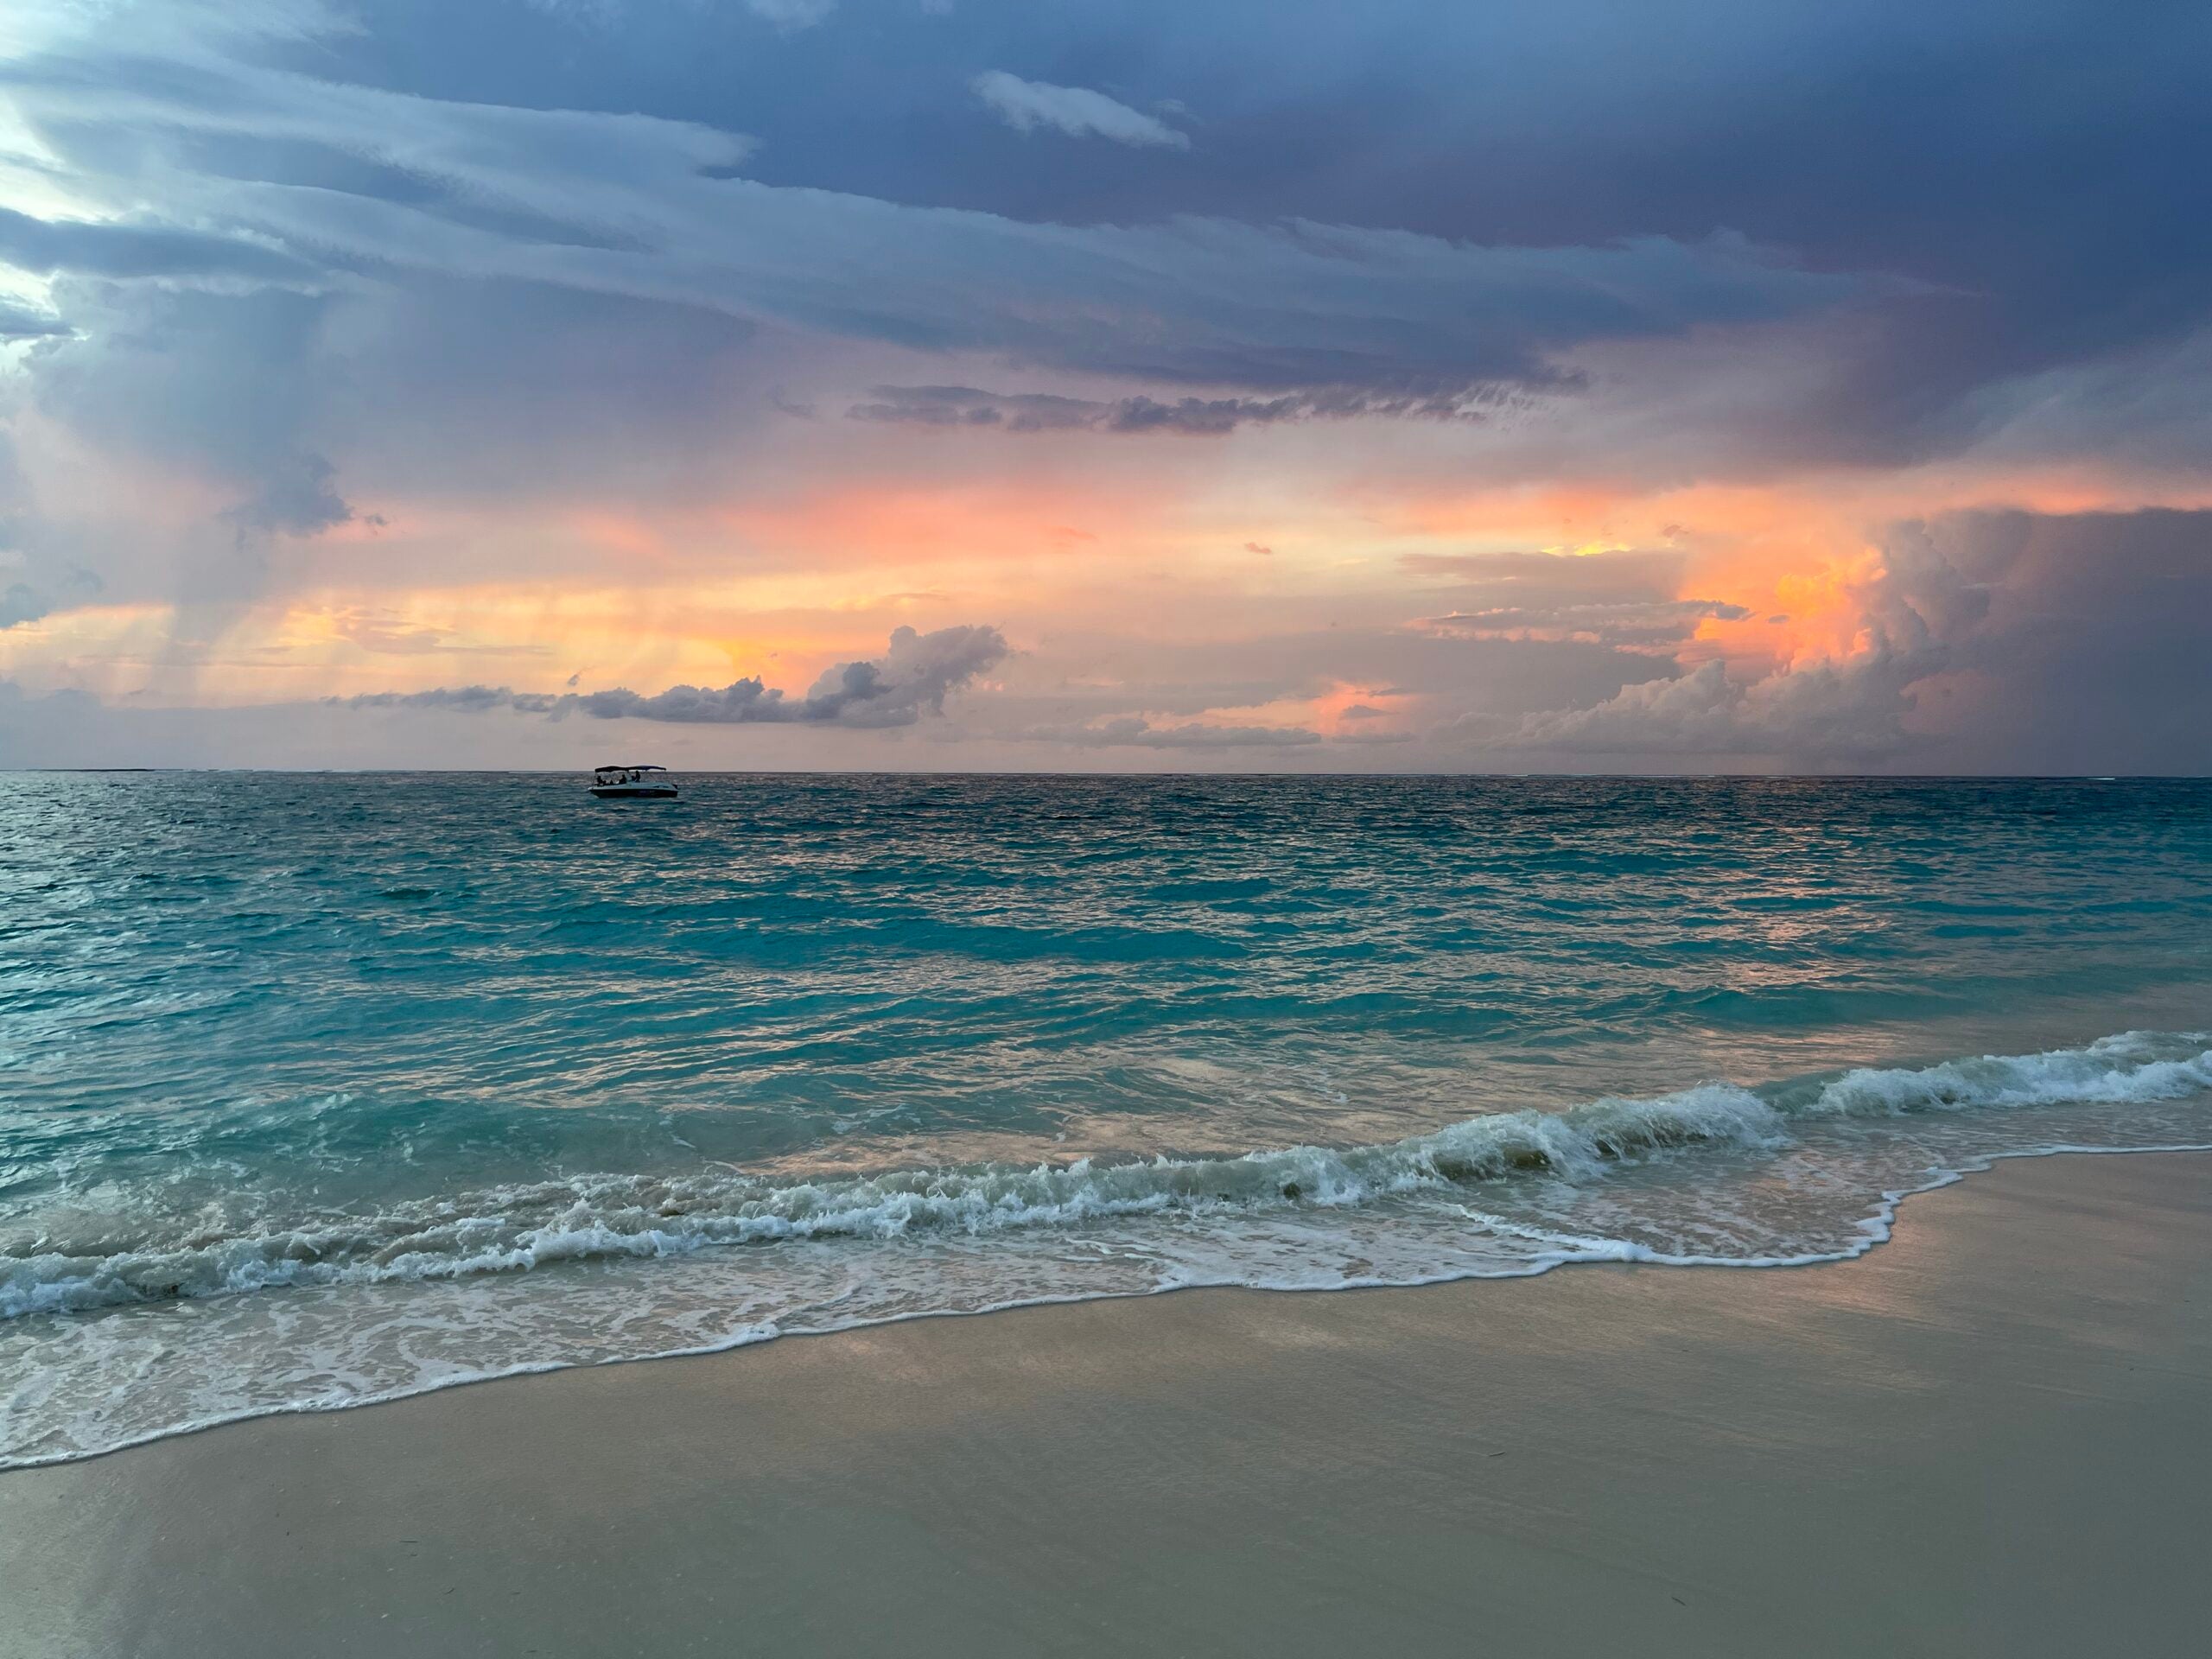 Turks and Caicos flights for $300 or less turks sunset scaled